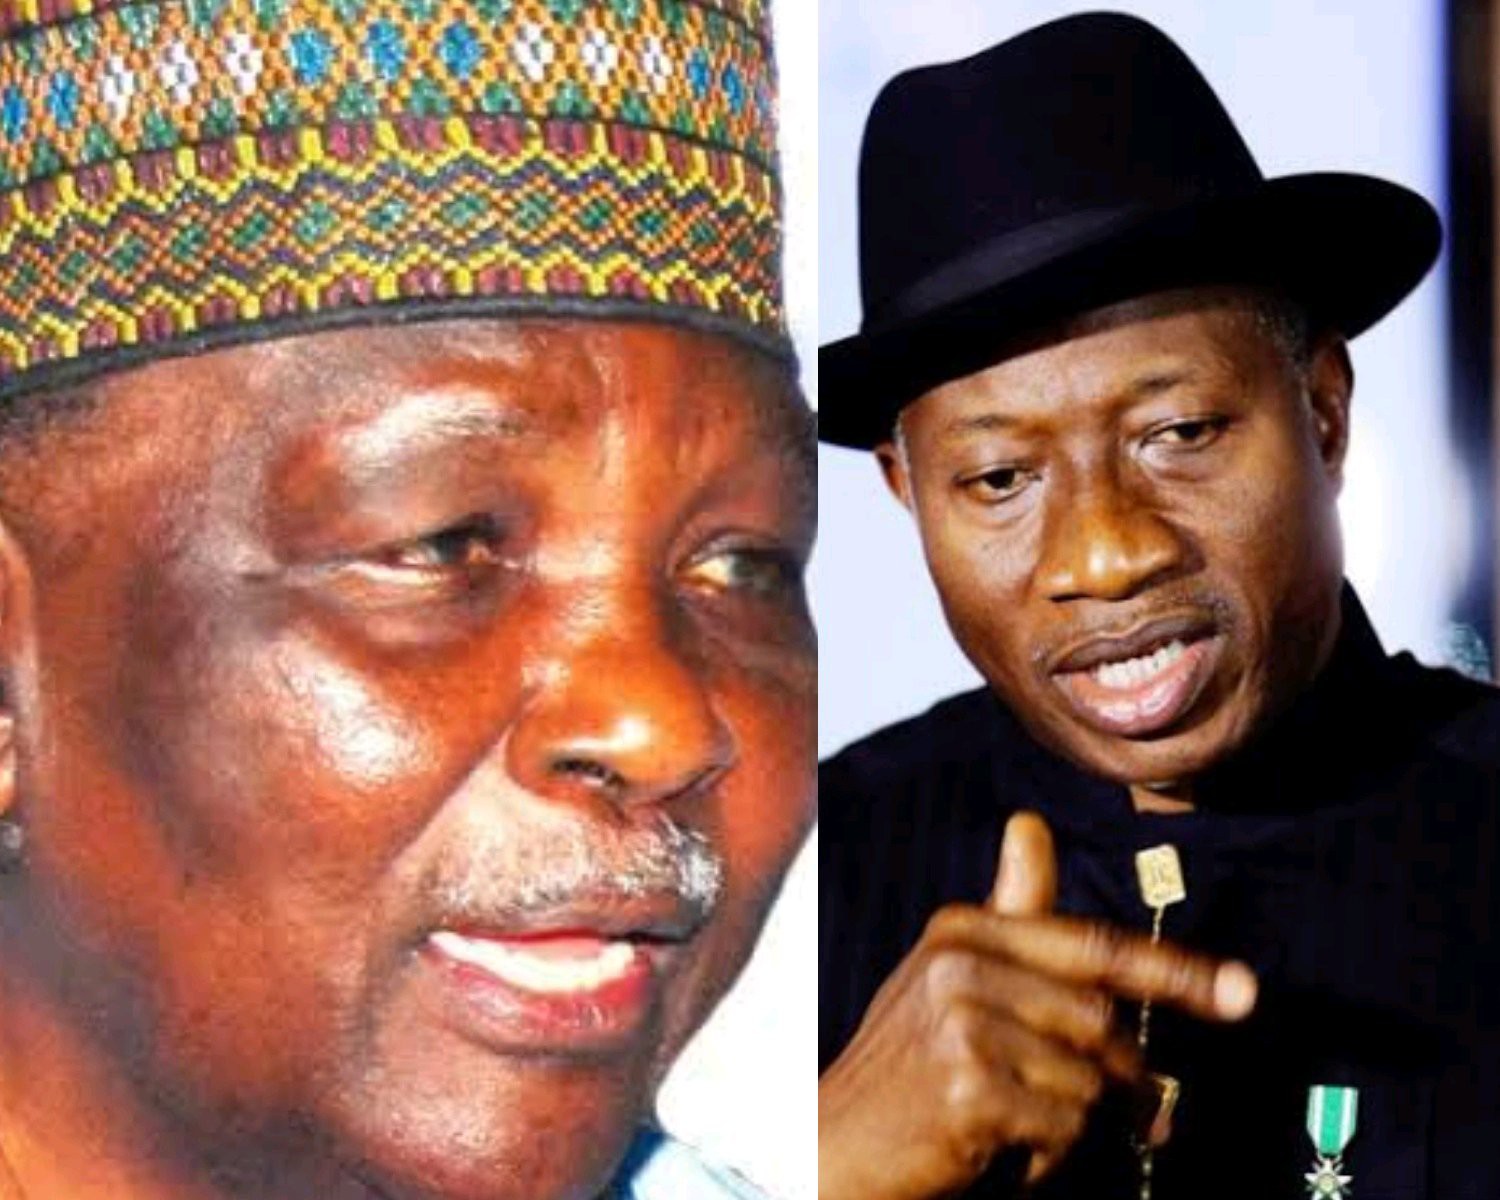 "Jonathan said 'My ambition is not worth the blood of any Nigerian' graciously conceded defeat" - According to Gowon